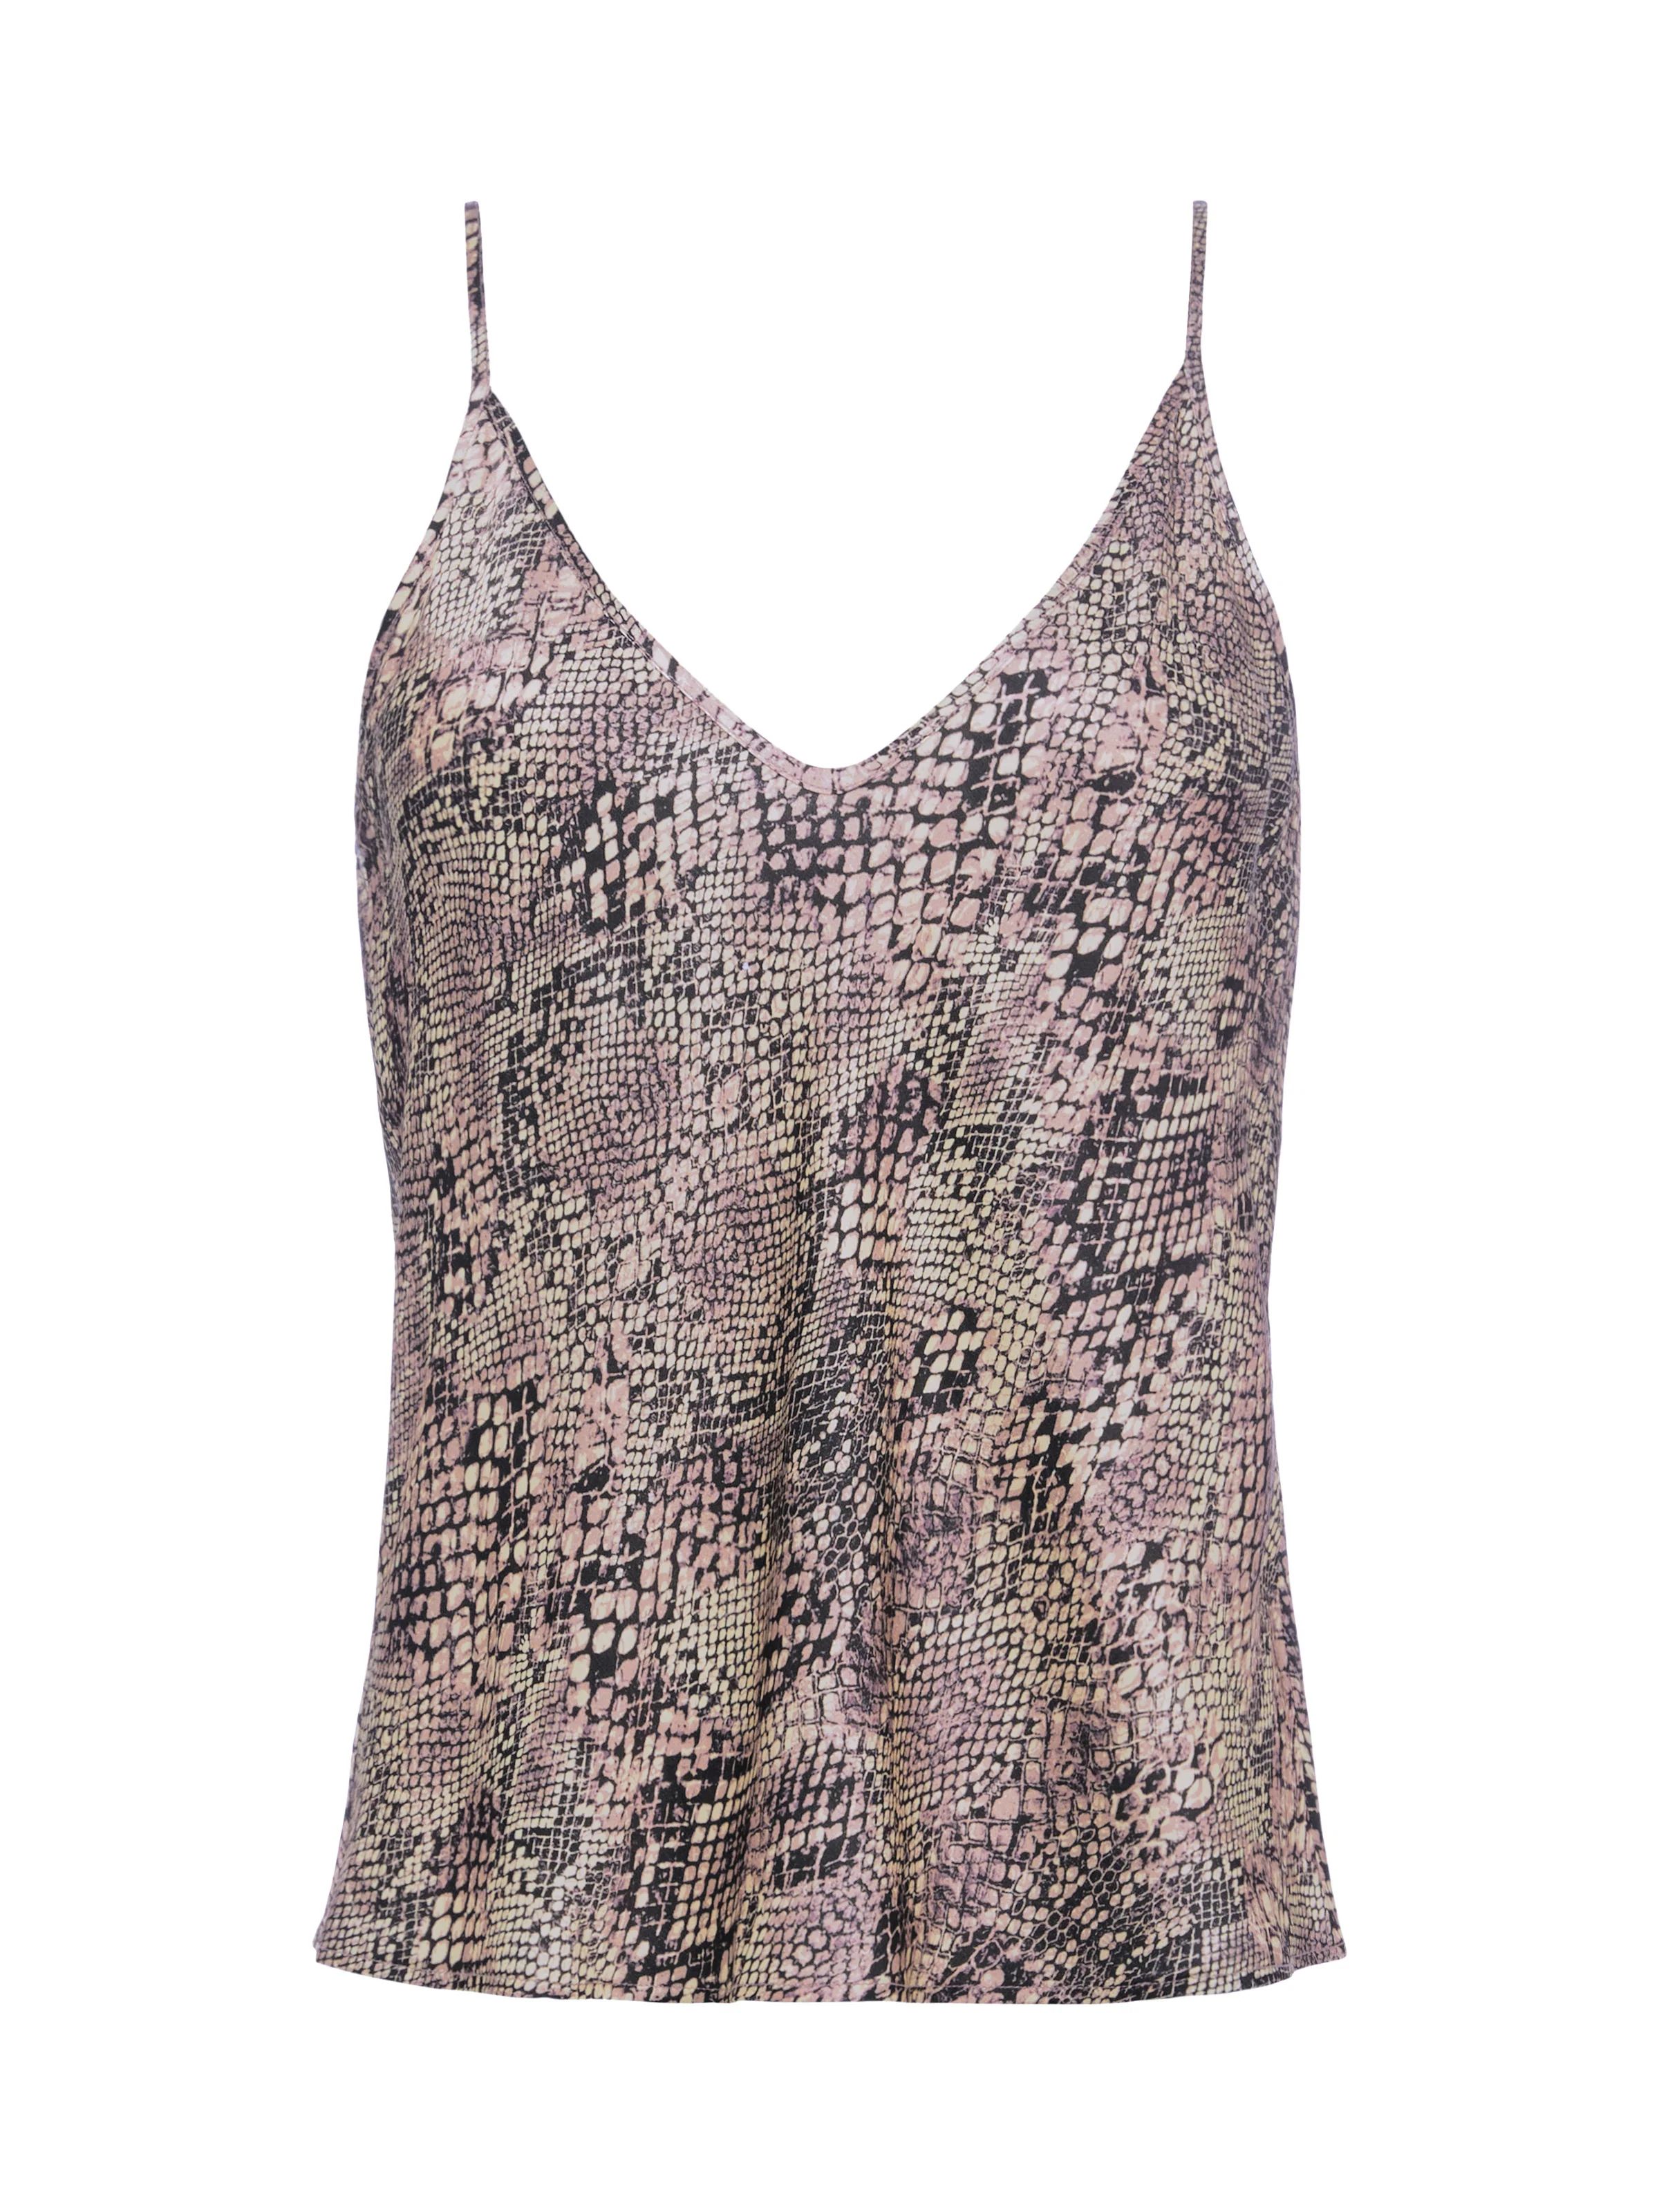 L'AGENCE Lexi Camisole Tank in Brown Multi Garden Snake | L'Agence